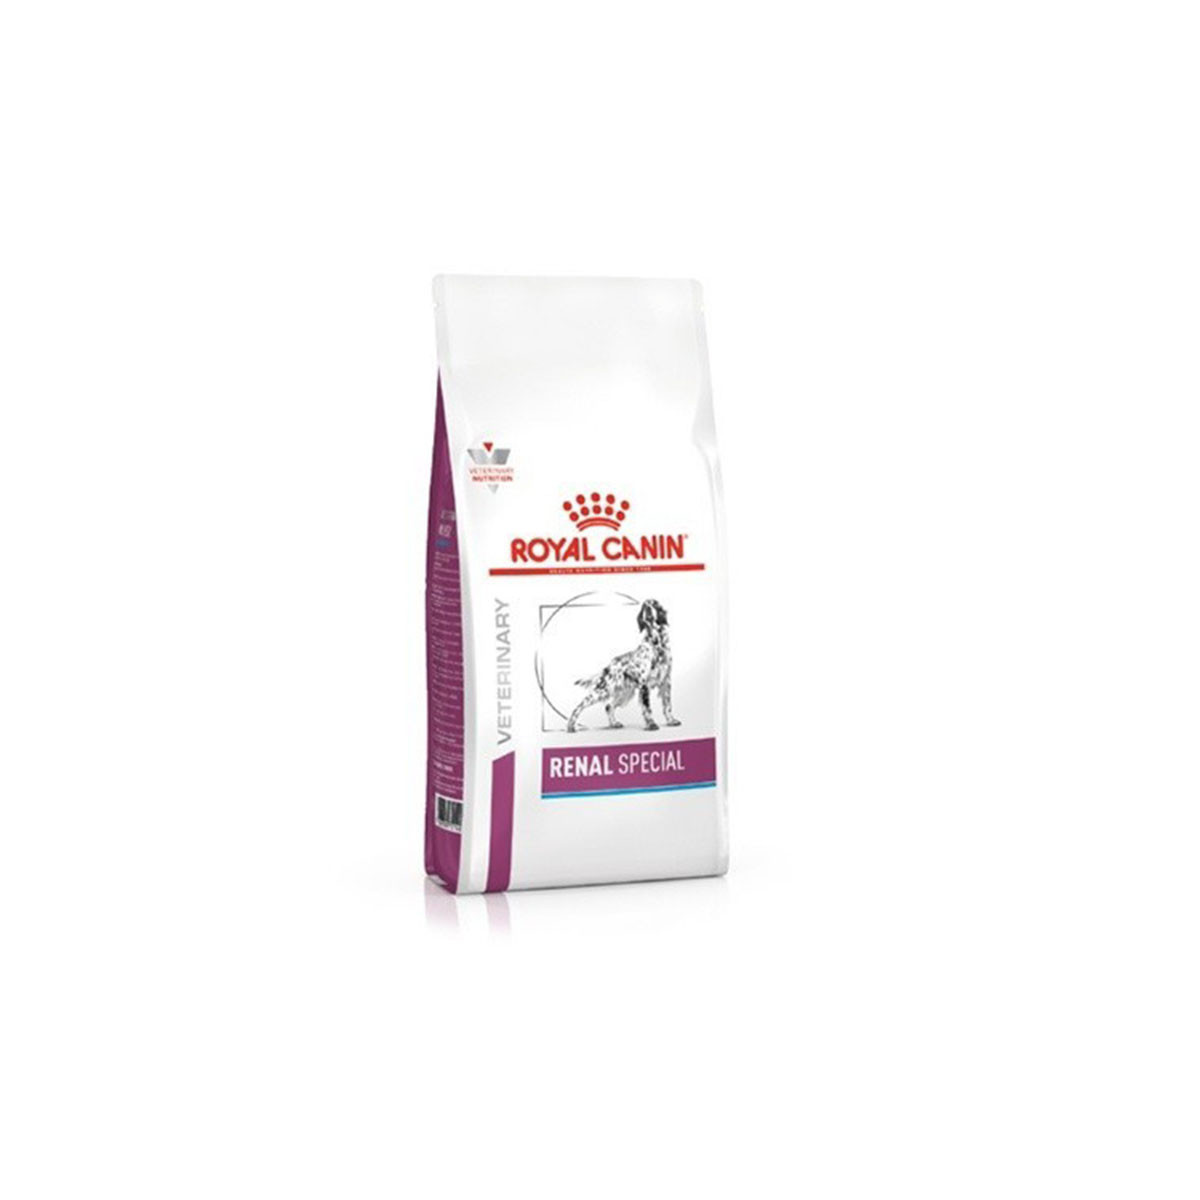 Royal Canin Renal Special RSF13